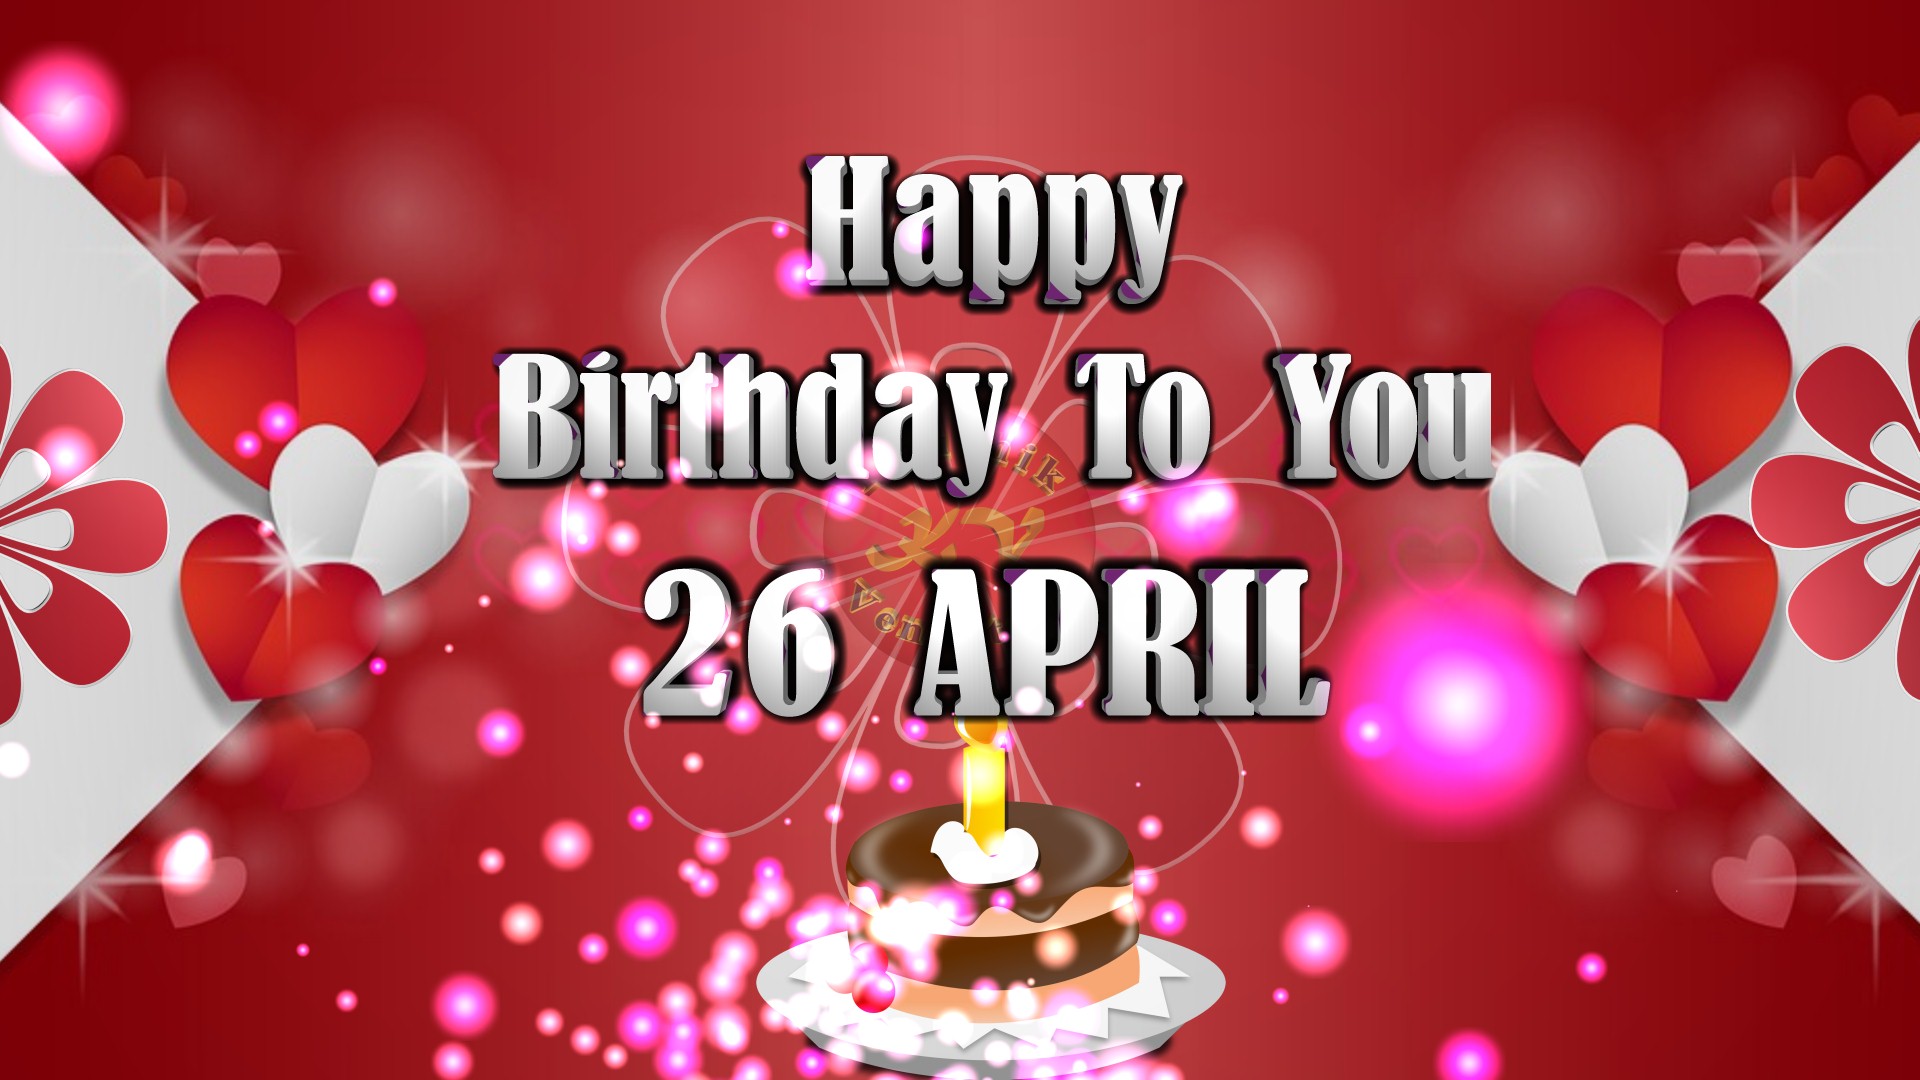 Happy Birthday 26 April, Wishes, Video, Messages, Quotes, GIF, Images, Ecard